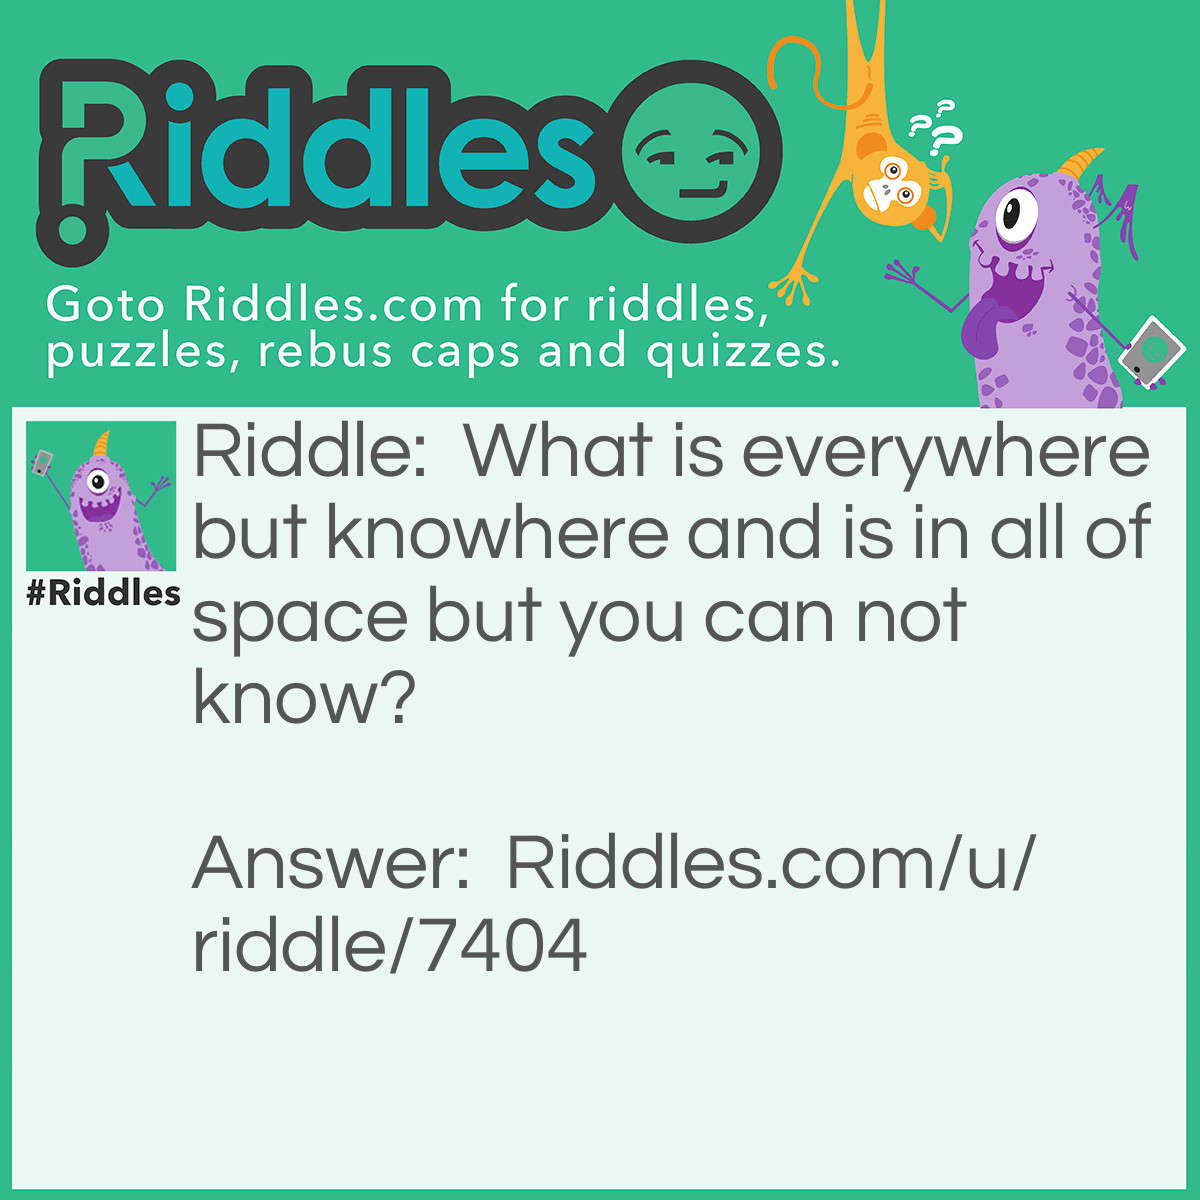 Riddle: What is everywhere but knowhere and is in all of space but you can not know? Answer: Nothing.